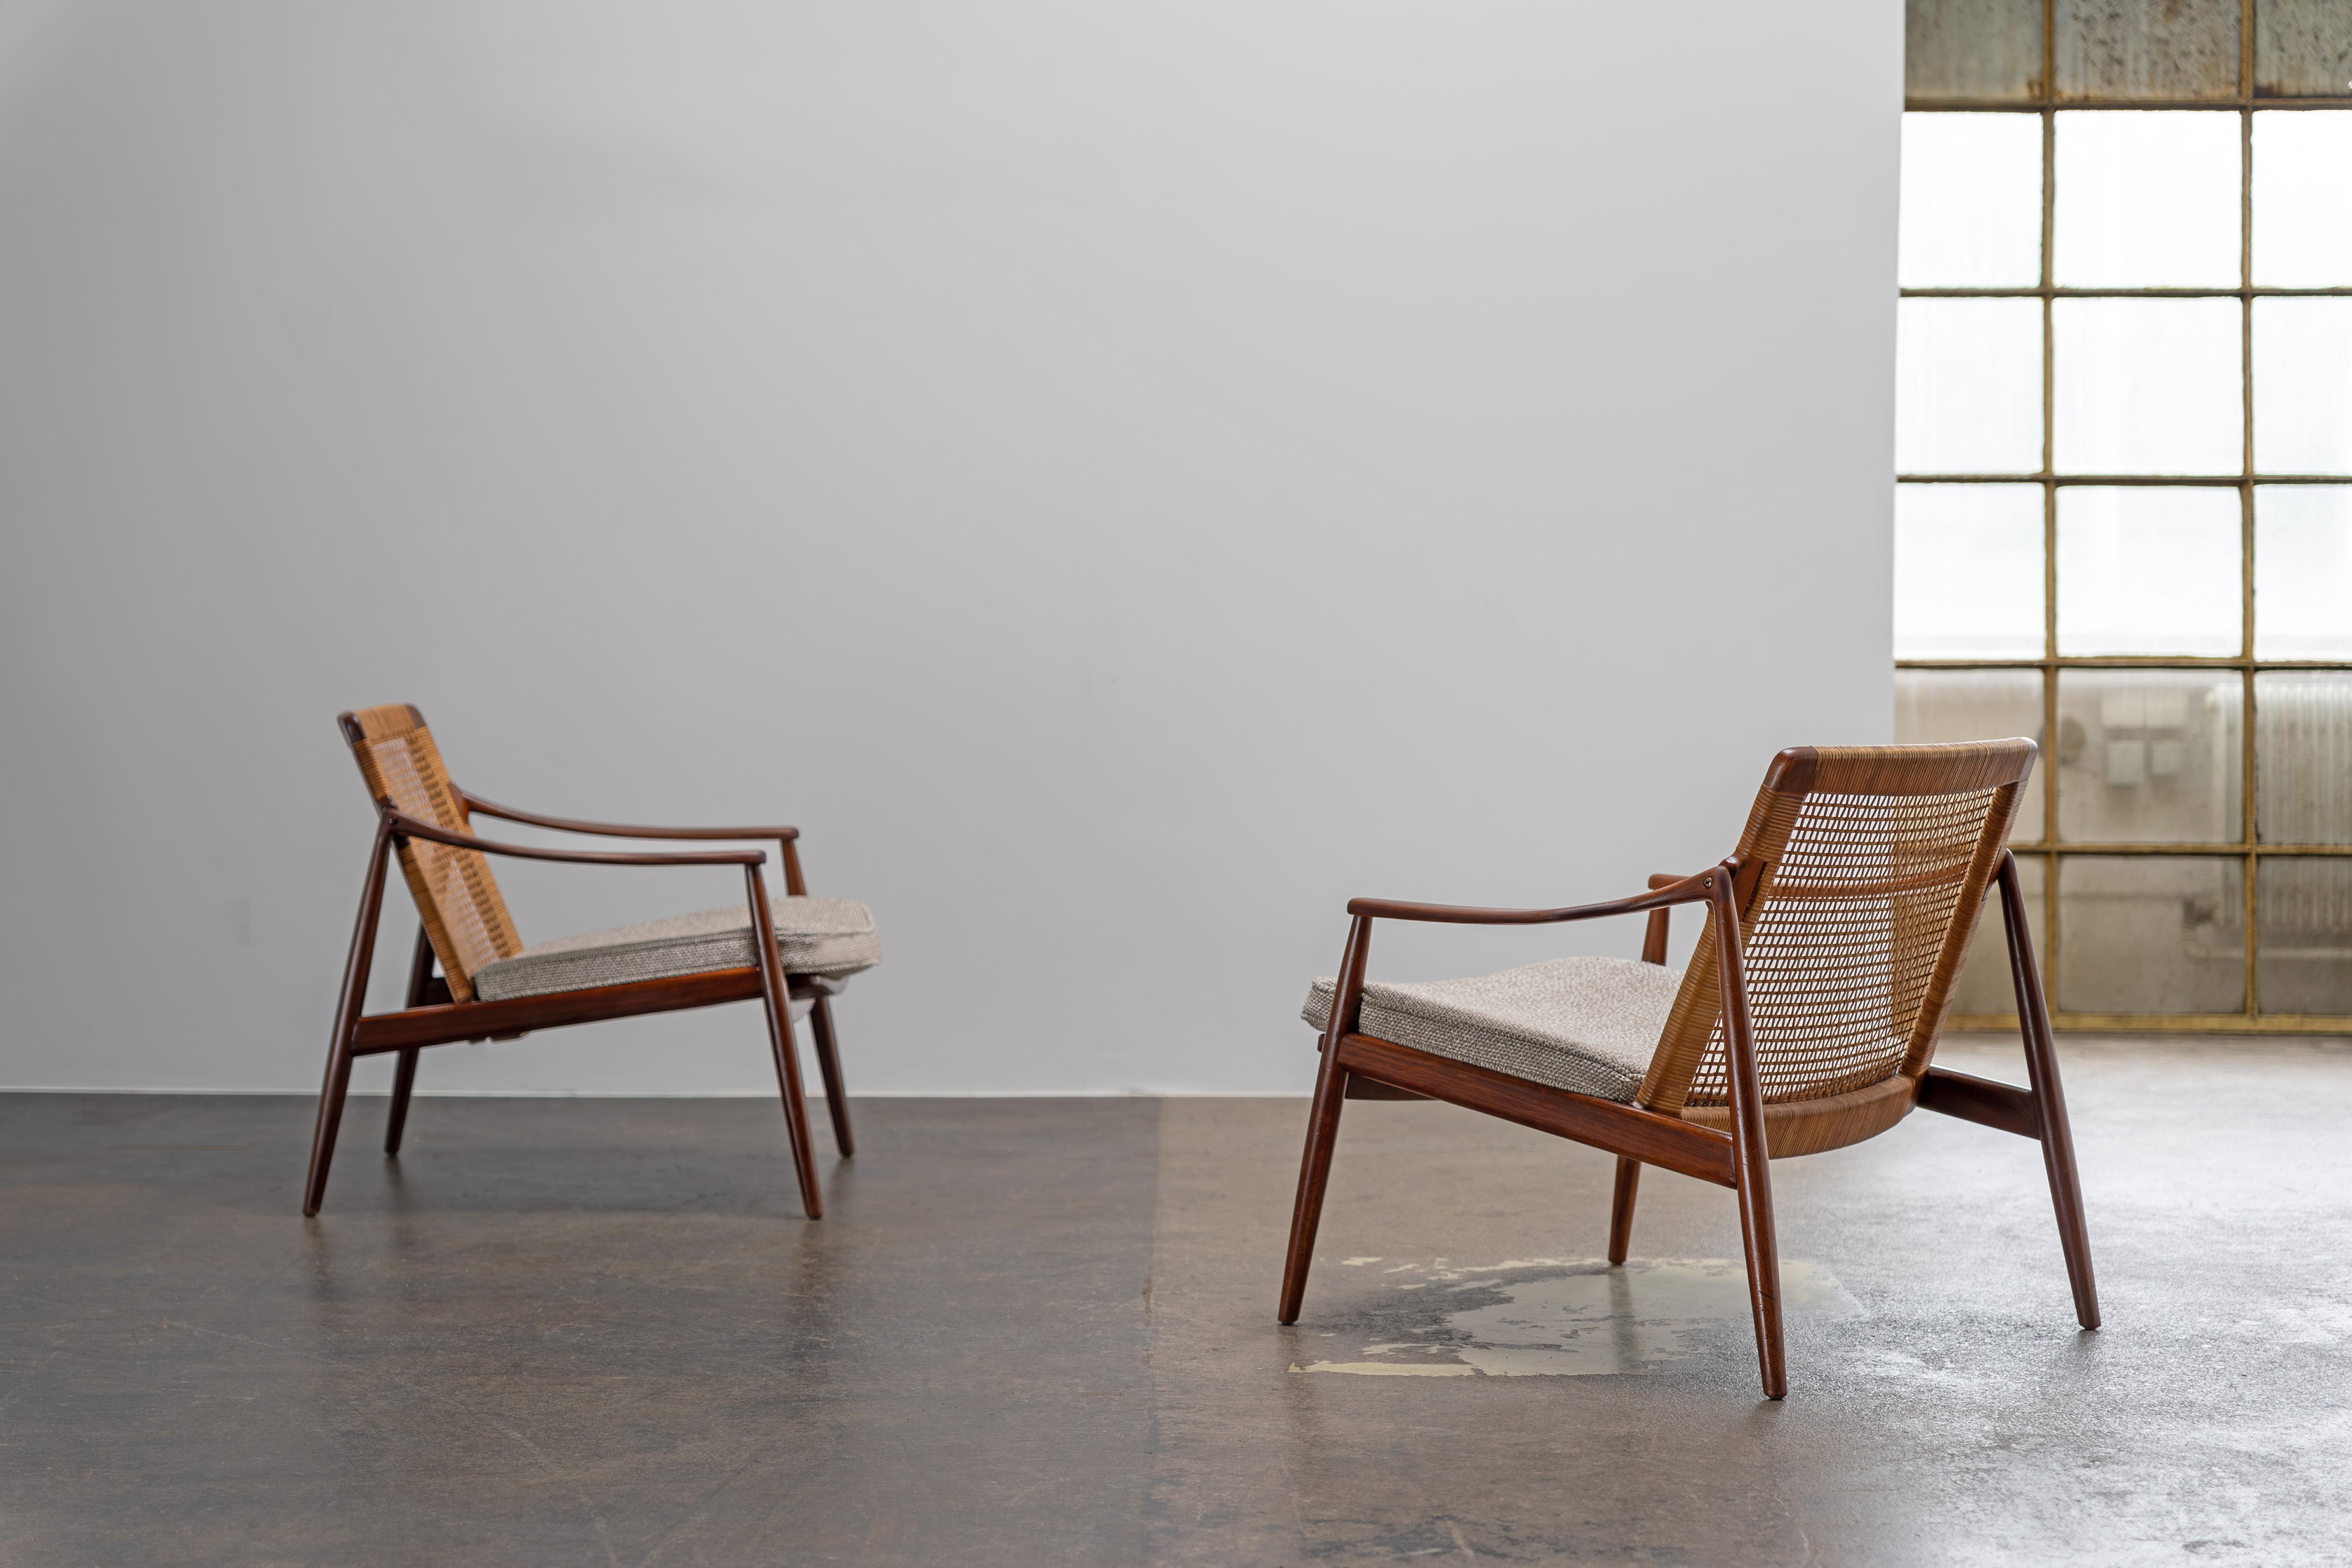 Easy Chairs - Hartmut Lohmeyer
Wilkhahn, 1960s

Design classic by Hartmut Lohmeyer for Wilkhahn, Germany. Filigree teak frame with rattan backrest. The cushions have been expertly reupholstered with a high quality fabric by Sahco.

Sessel - Hartmut